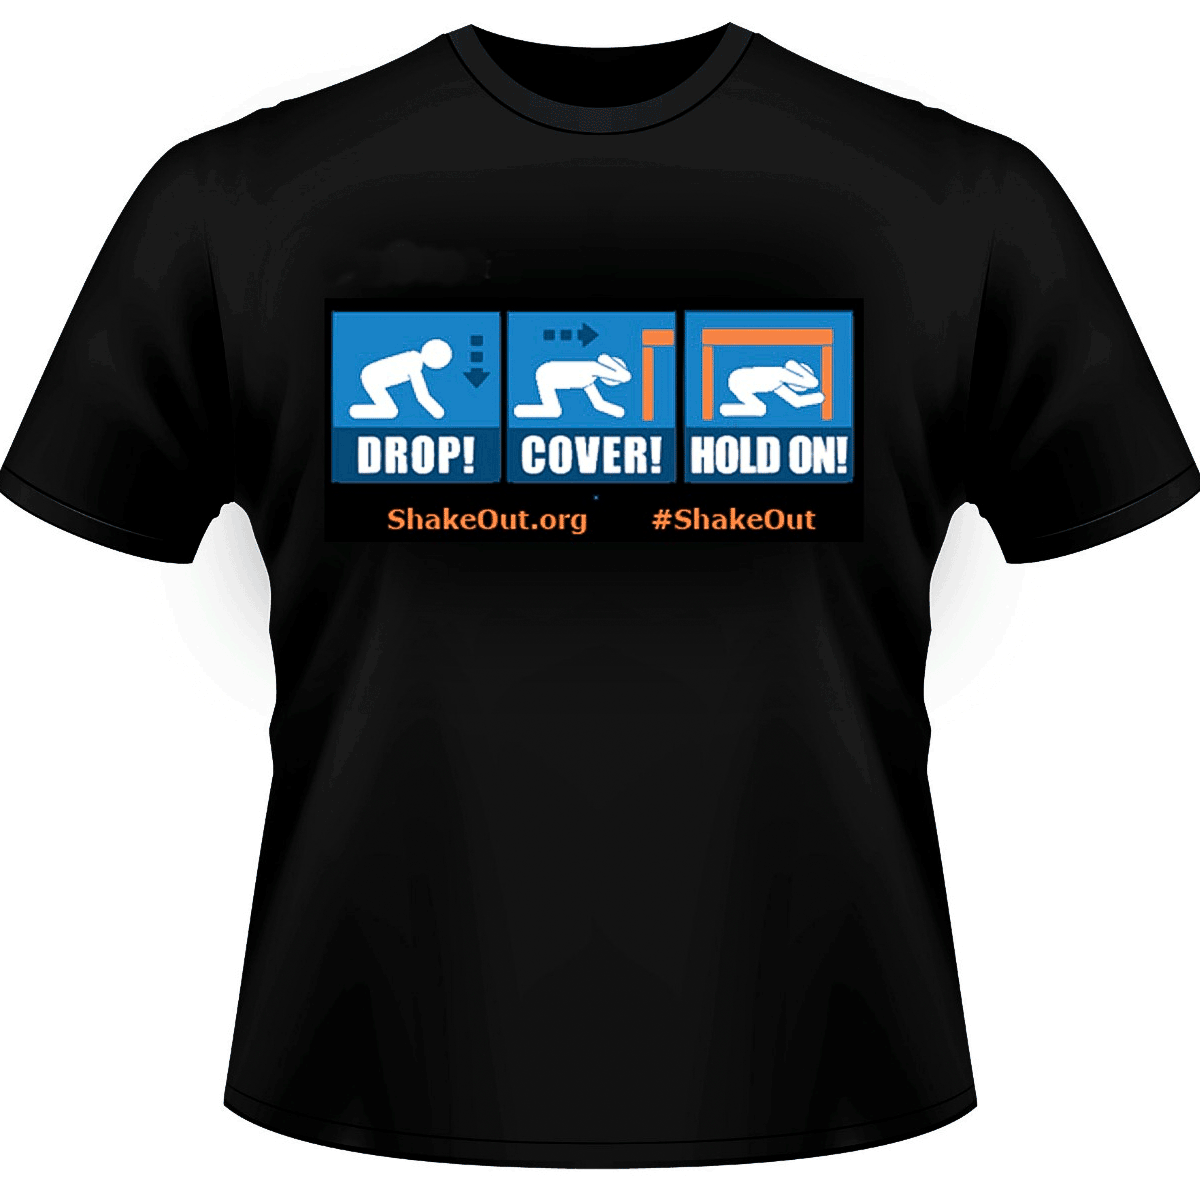 The Great Colorado ShakeOut T-Shirt.